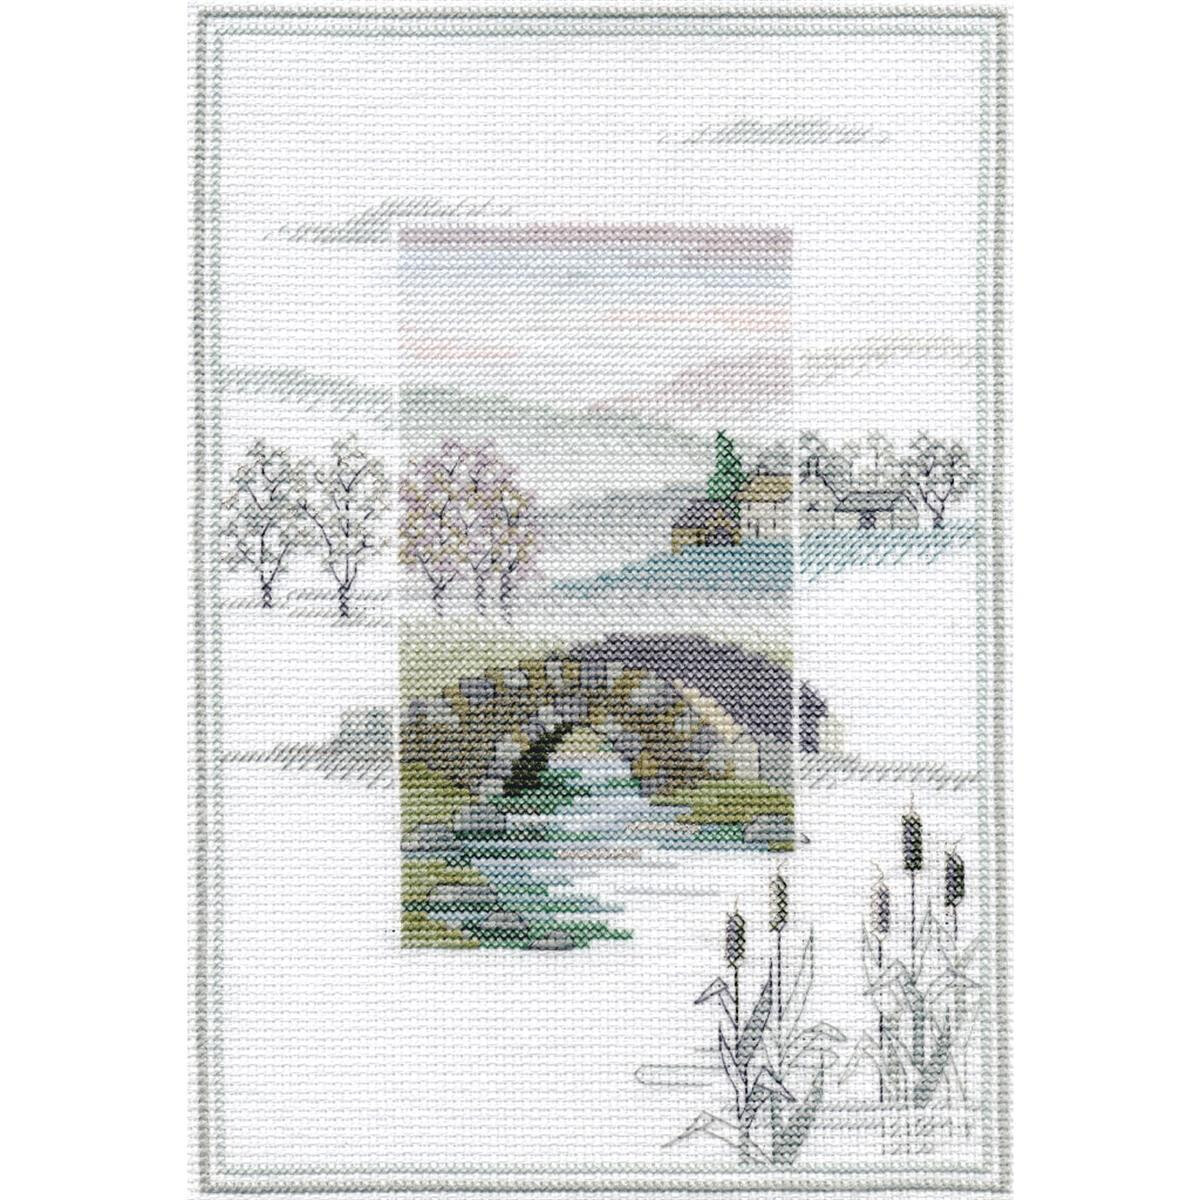 An embroidery pack from Bothy Threads shows a winter...